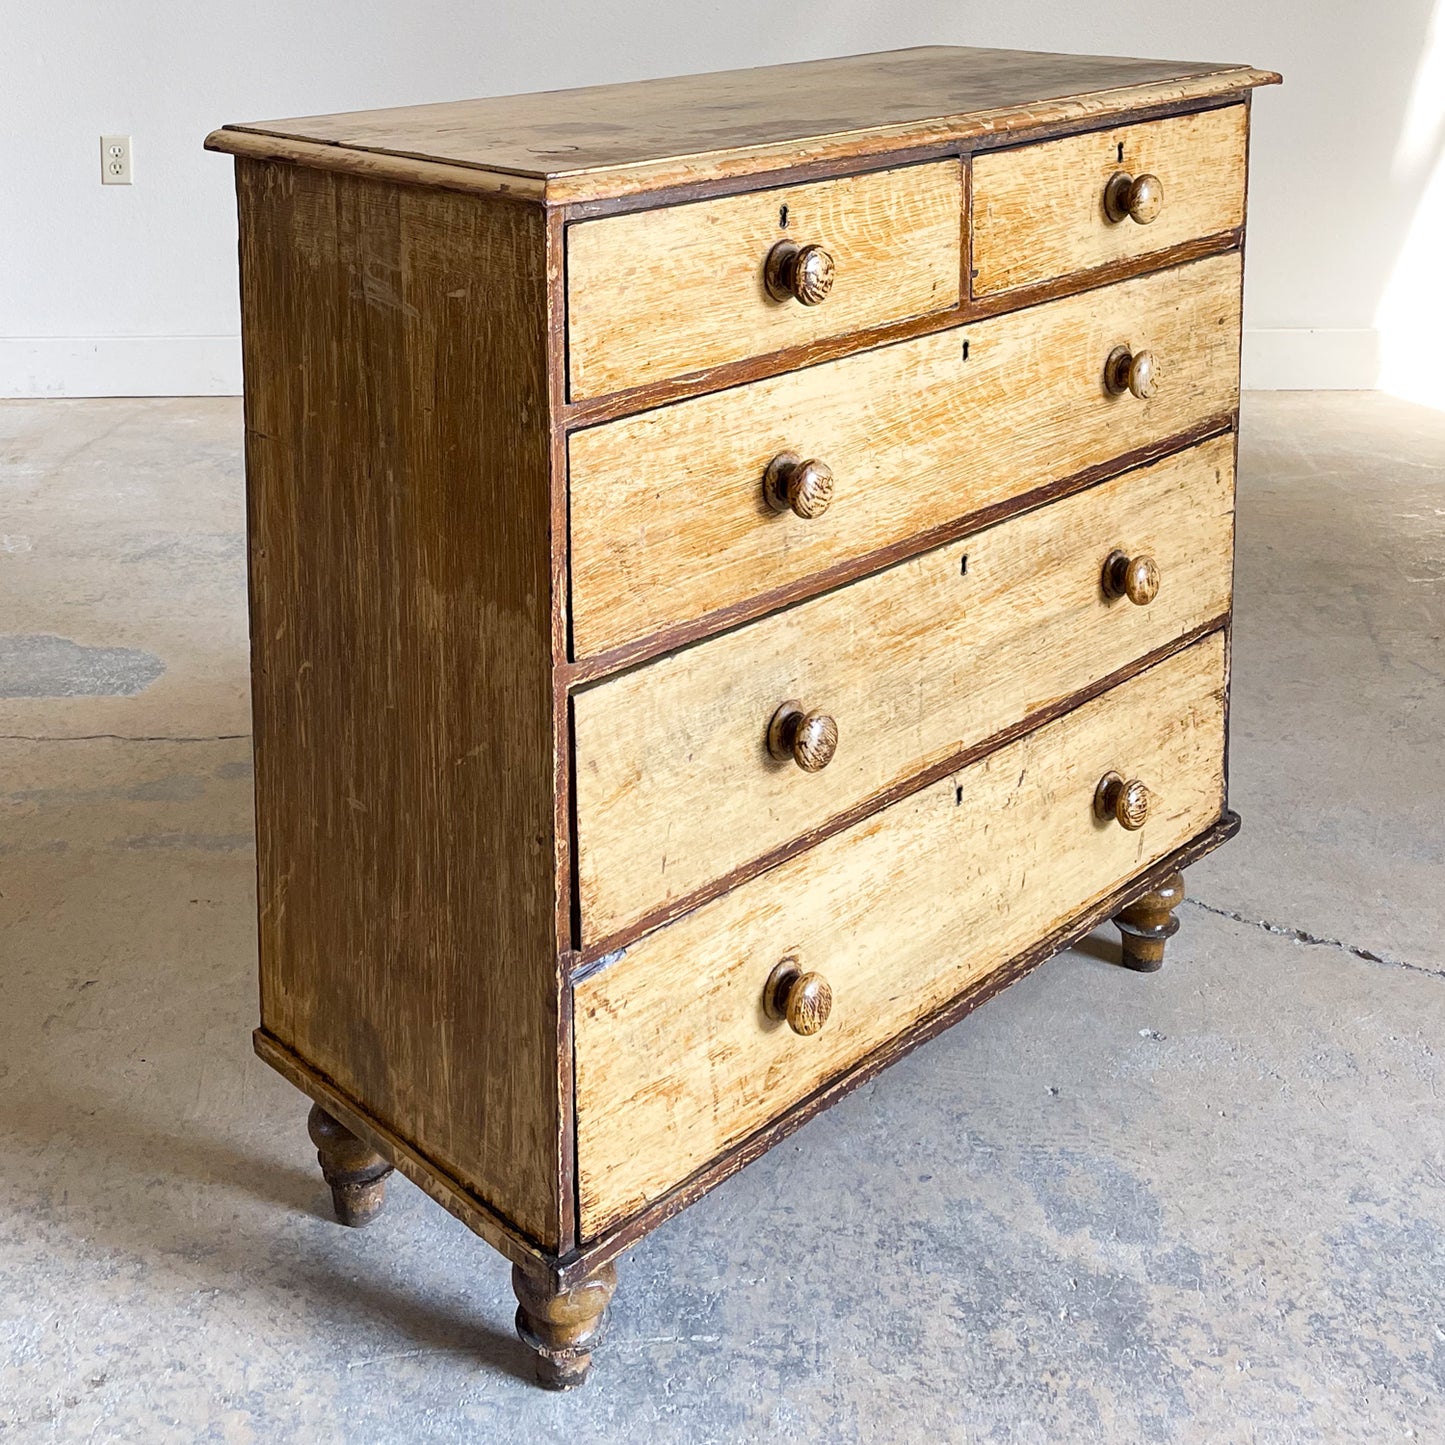 Original Painted English Chest of Drawers